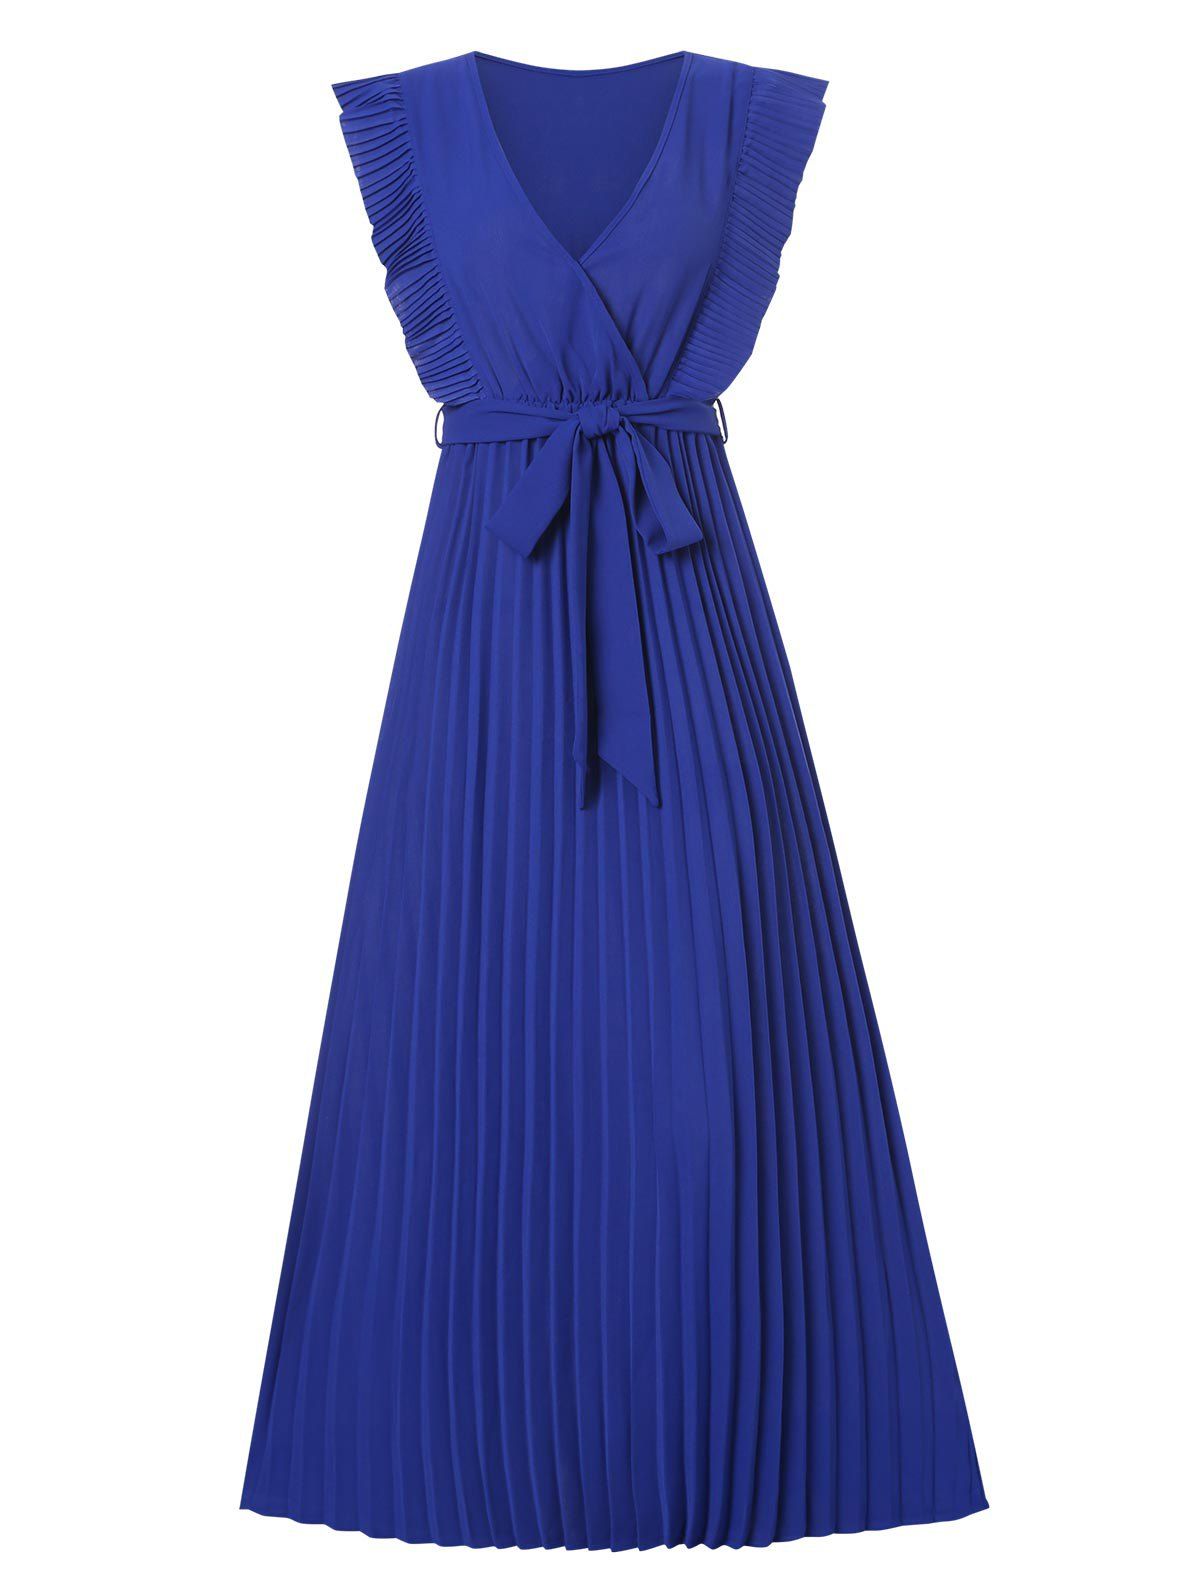 Vacation Surplice Pintuck Ruffle Belted A Line Pleated Dress - BLUE L